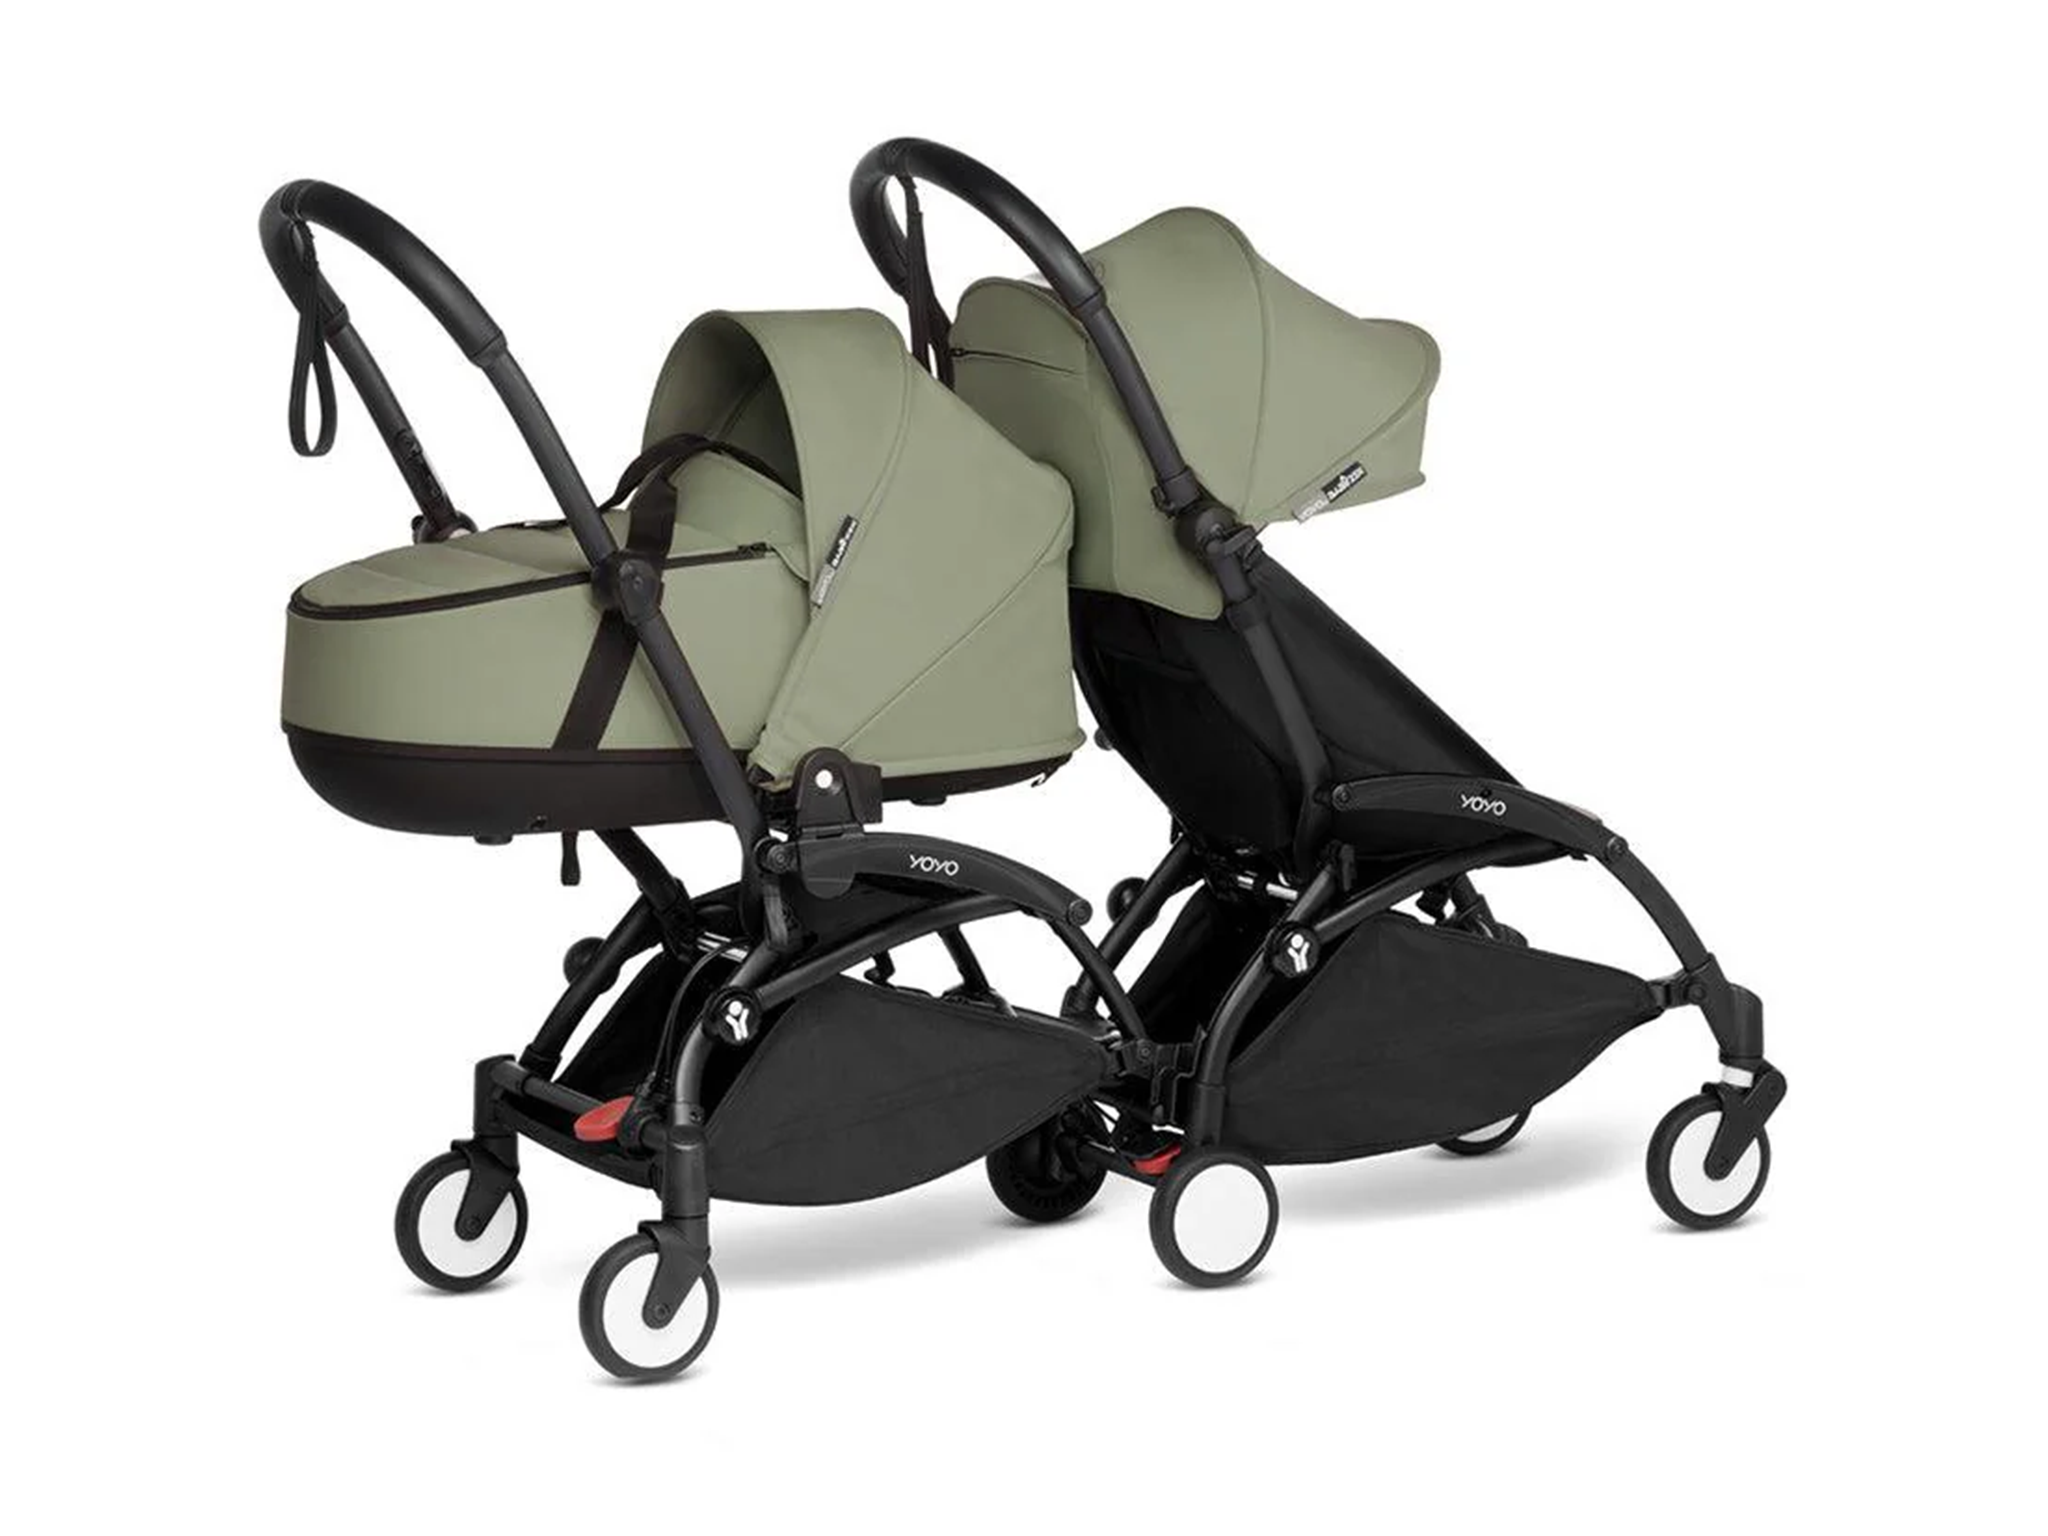 Babyzen sells an adaptor to connect two single buggies